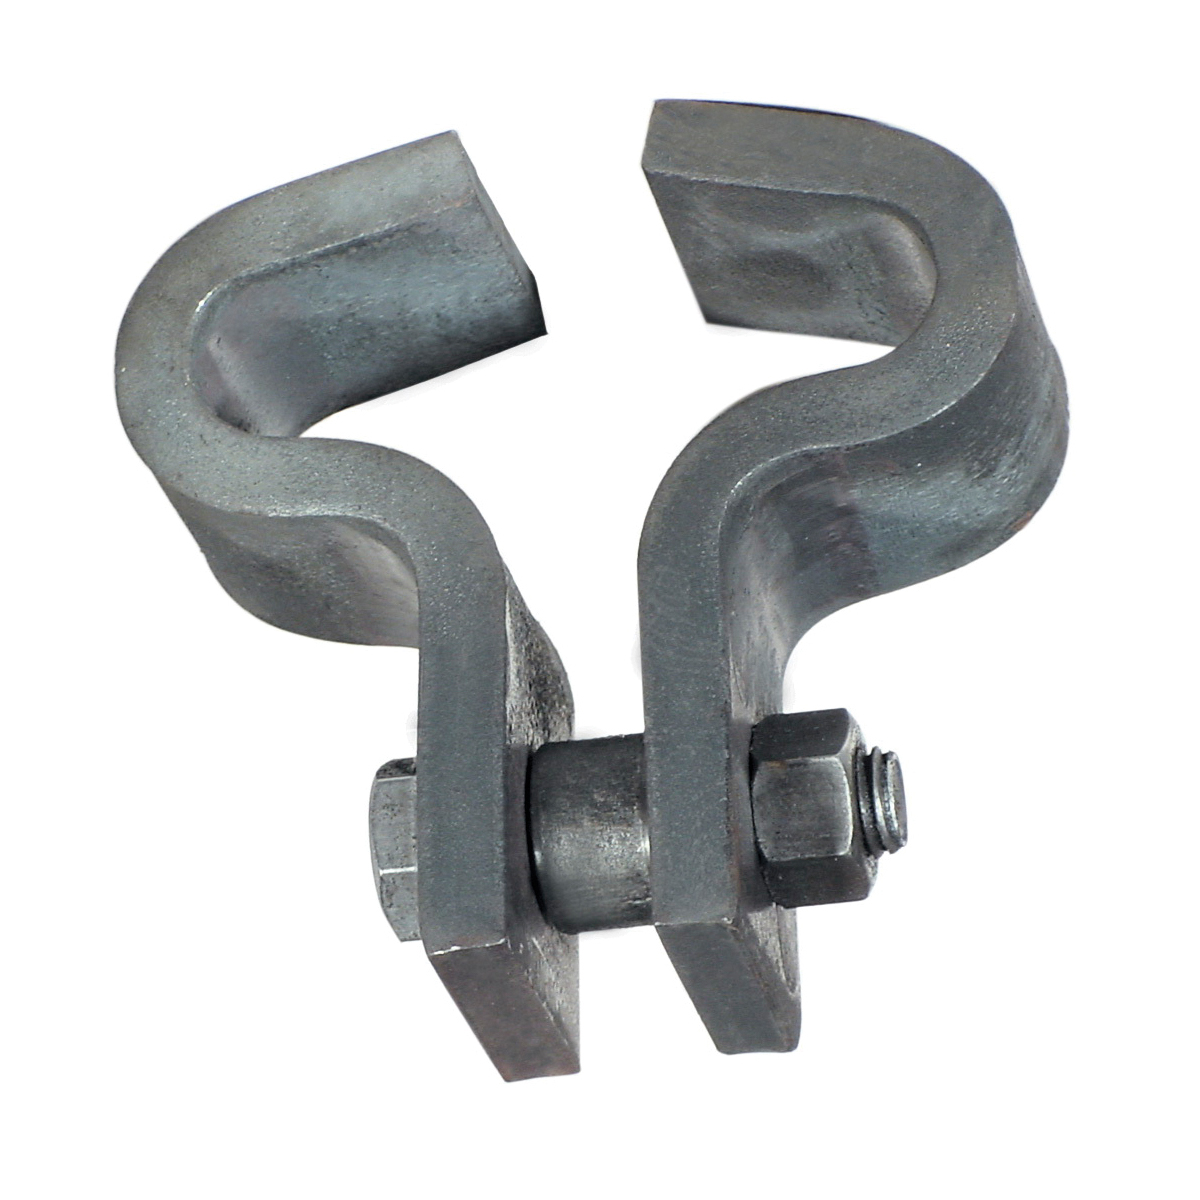 Anvil® 0500315189 FIG 134 Heavy Duty Beam Clamp, 1 in THK Flange, 3000 lb Load, Carbon Steel, Galvanized